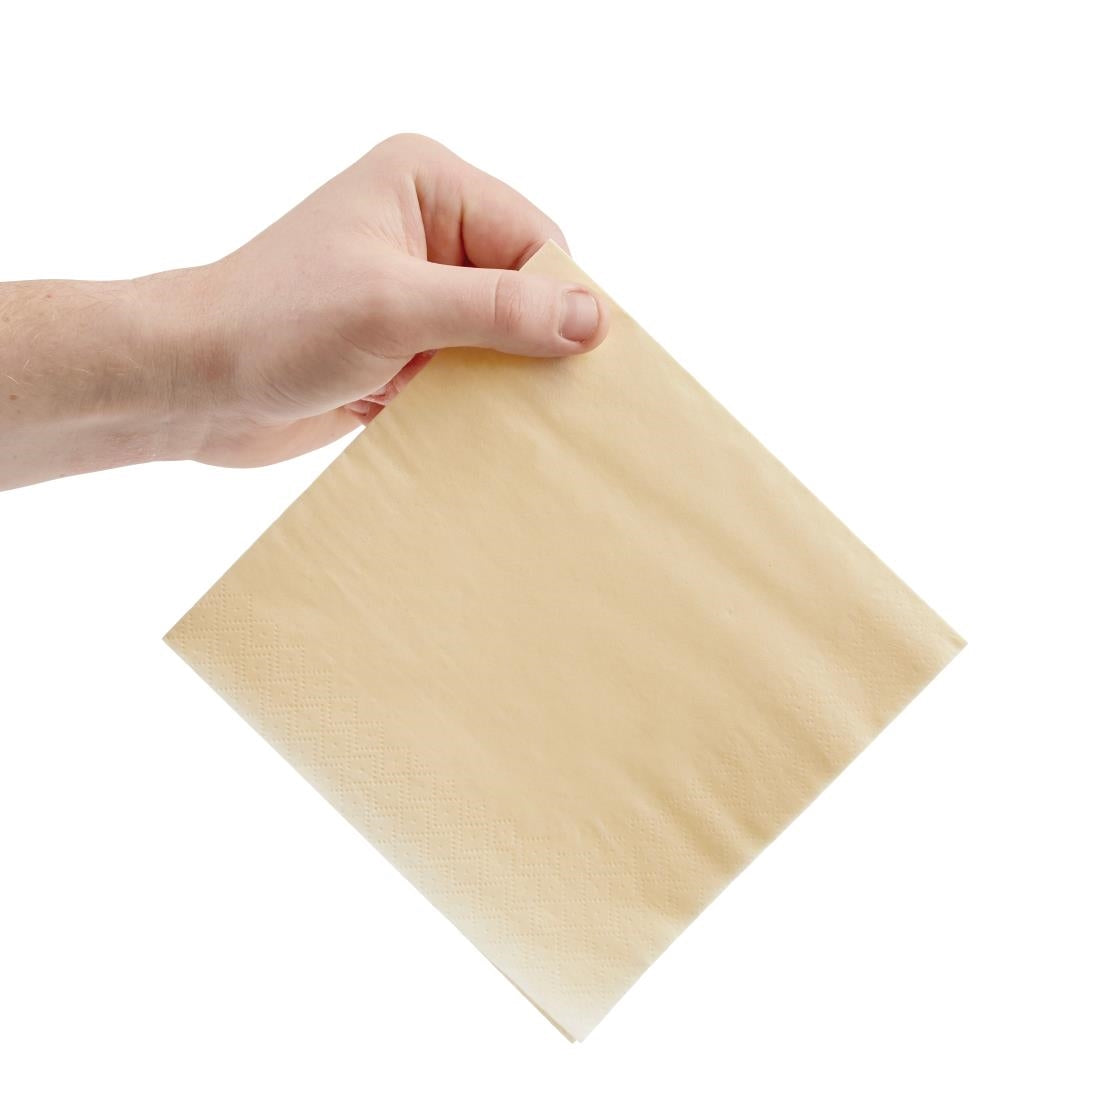 FE220 Fiesta Recyclable Lunch Napkin Cream 33x33cm 2ply 1/4 Fold (Pack of 2000) JD Catering Equipment Solutions Ltd